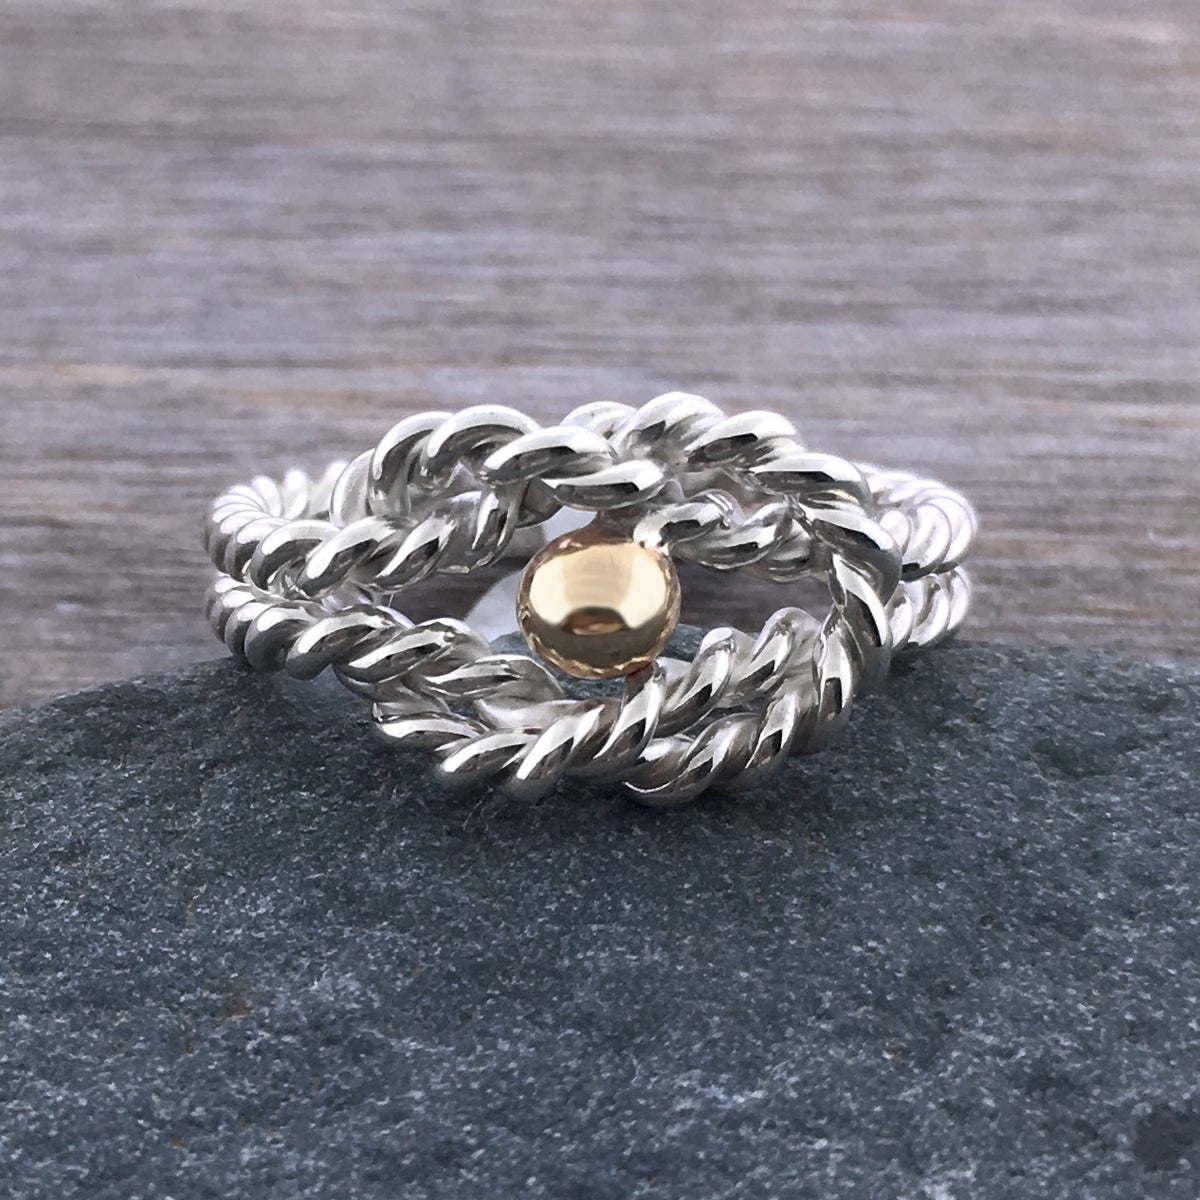 Cape Cod Twisted Sailor's Knot Ring – Cape Cod Jewelers